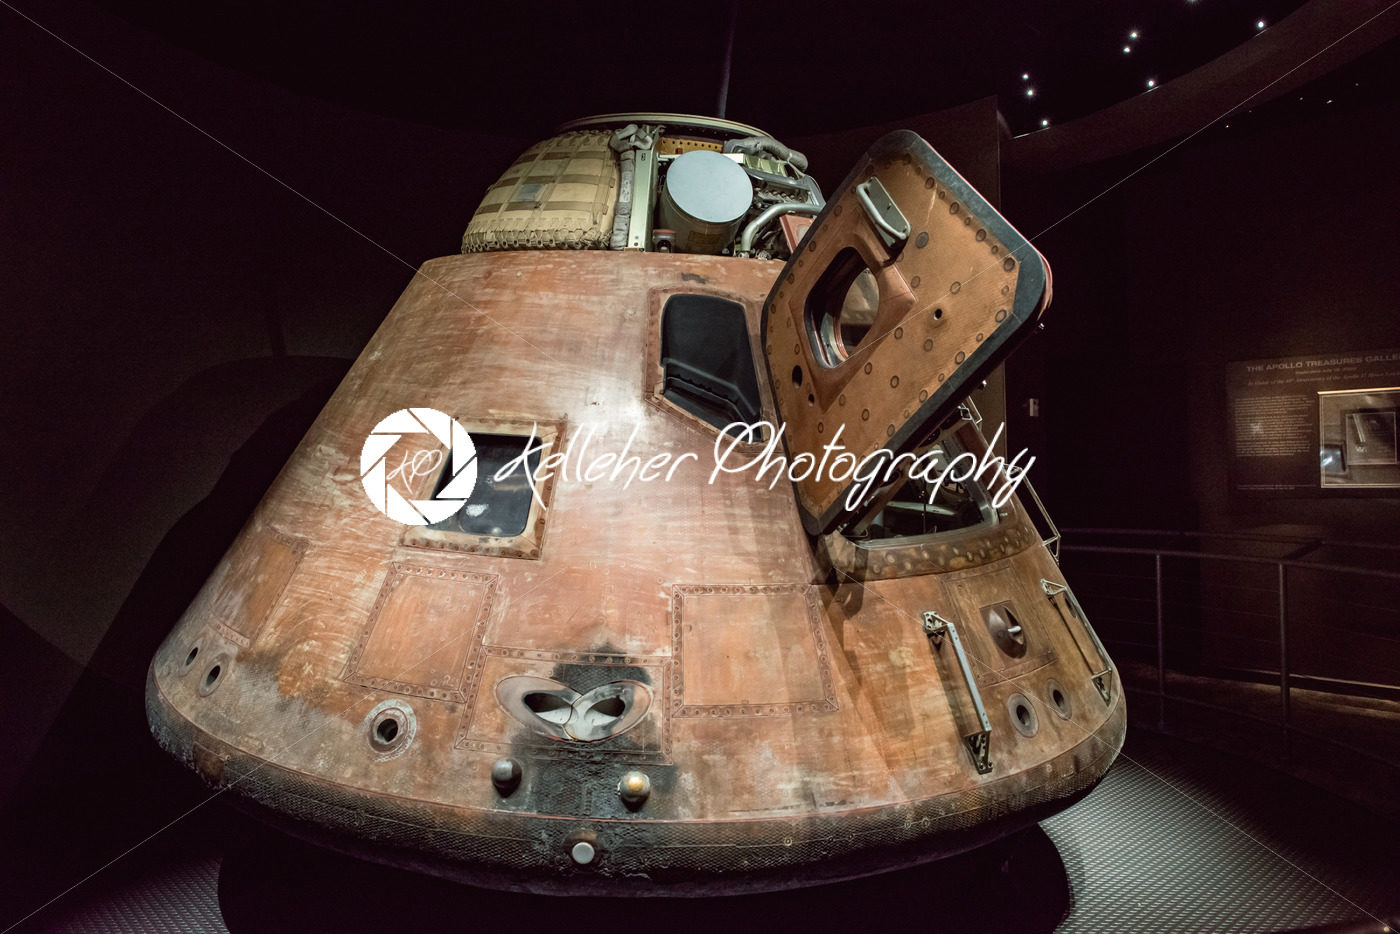 Cape Canaveral, Florida – August 13, 2018: Apollo 14 Capsuleat NASA Kennedy Space Center - Kelleher Photography Store